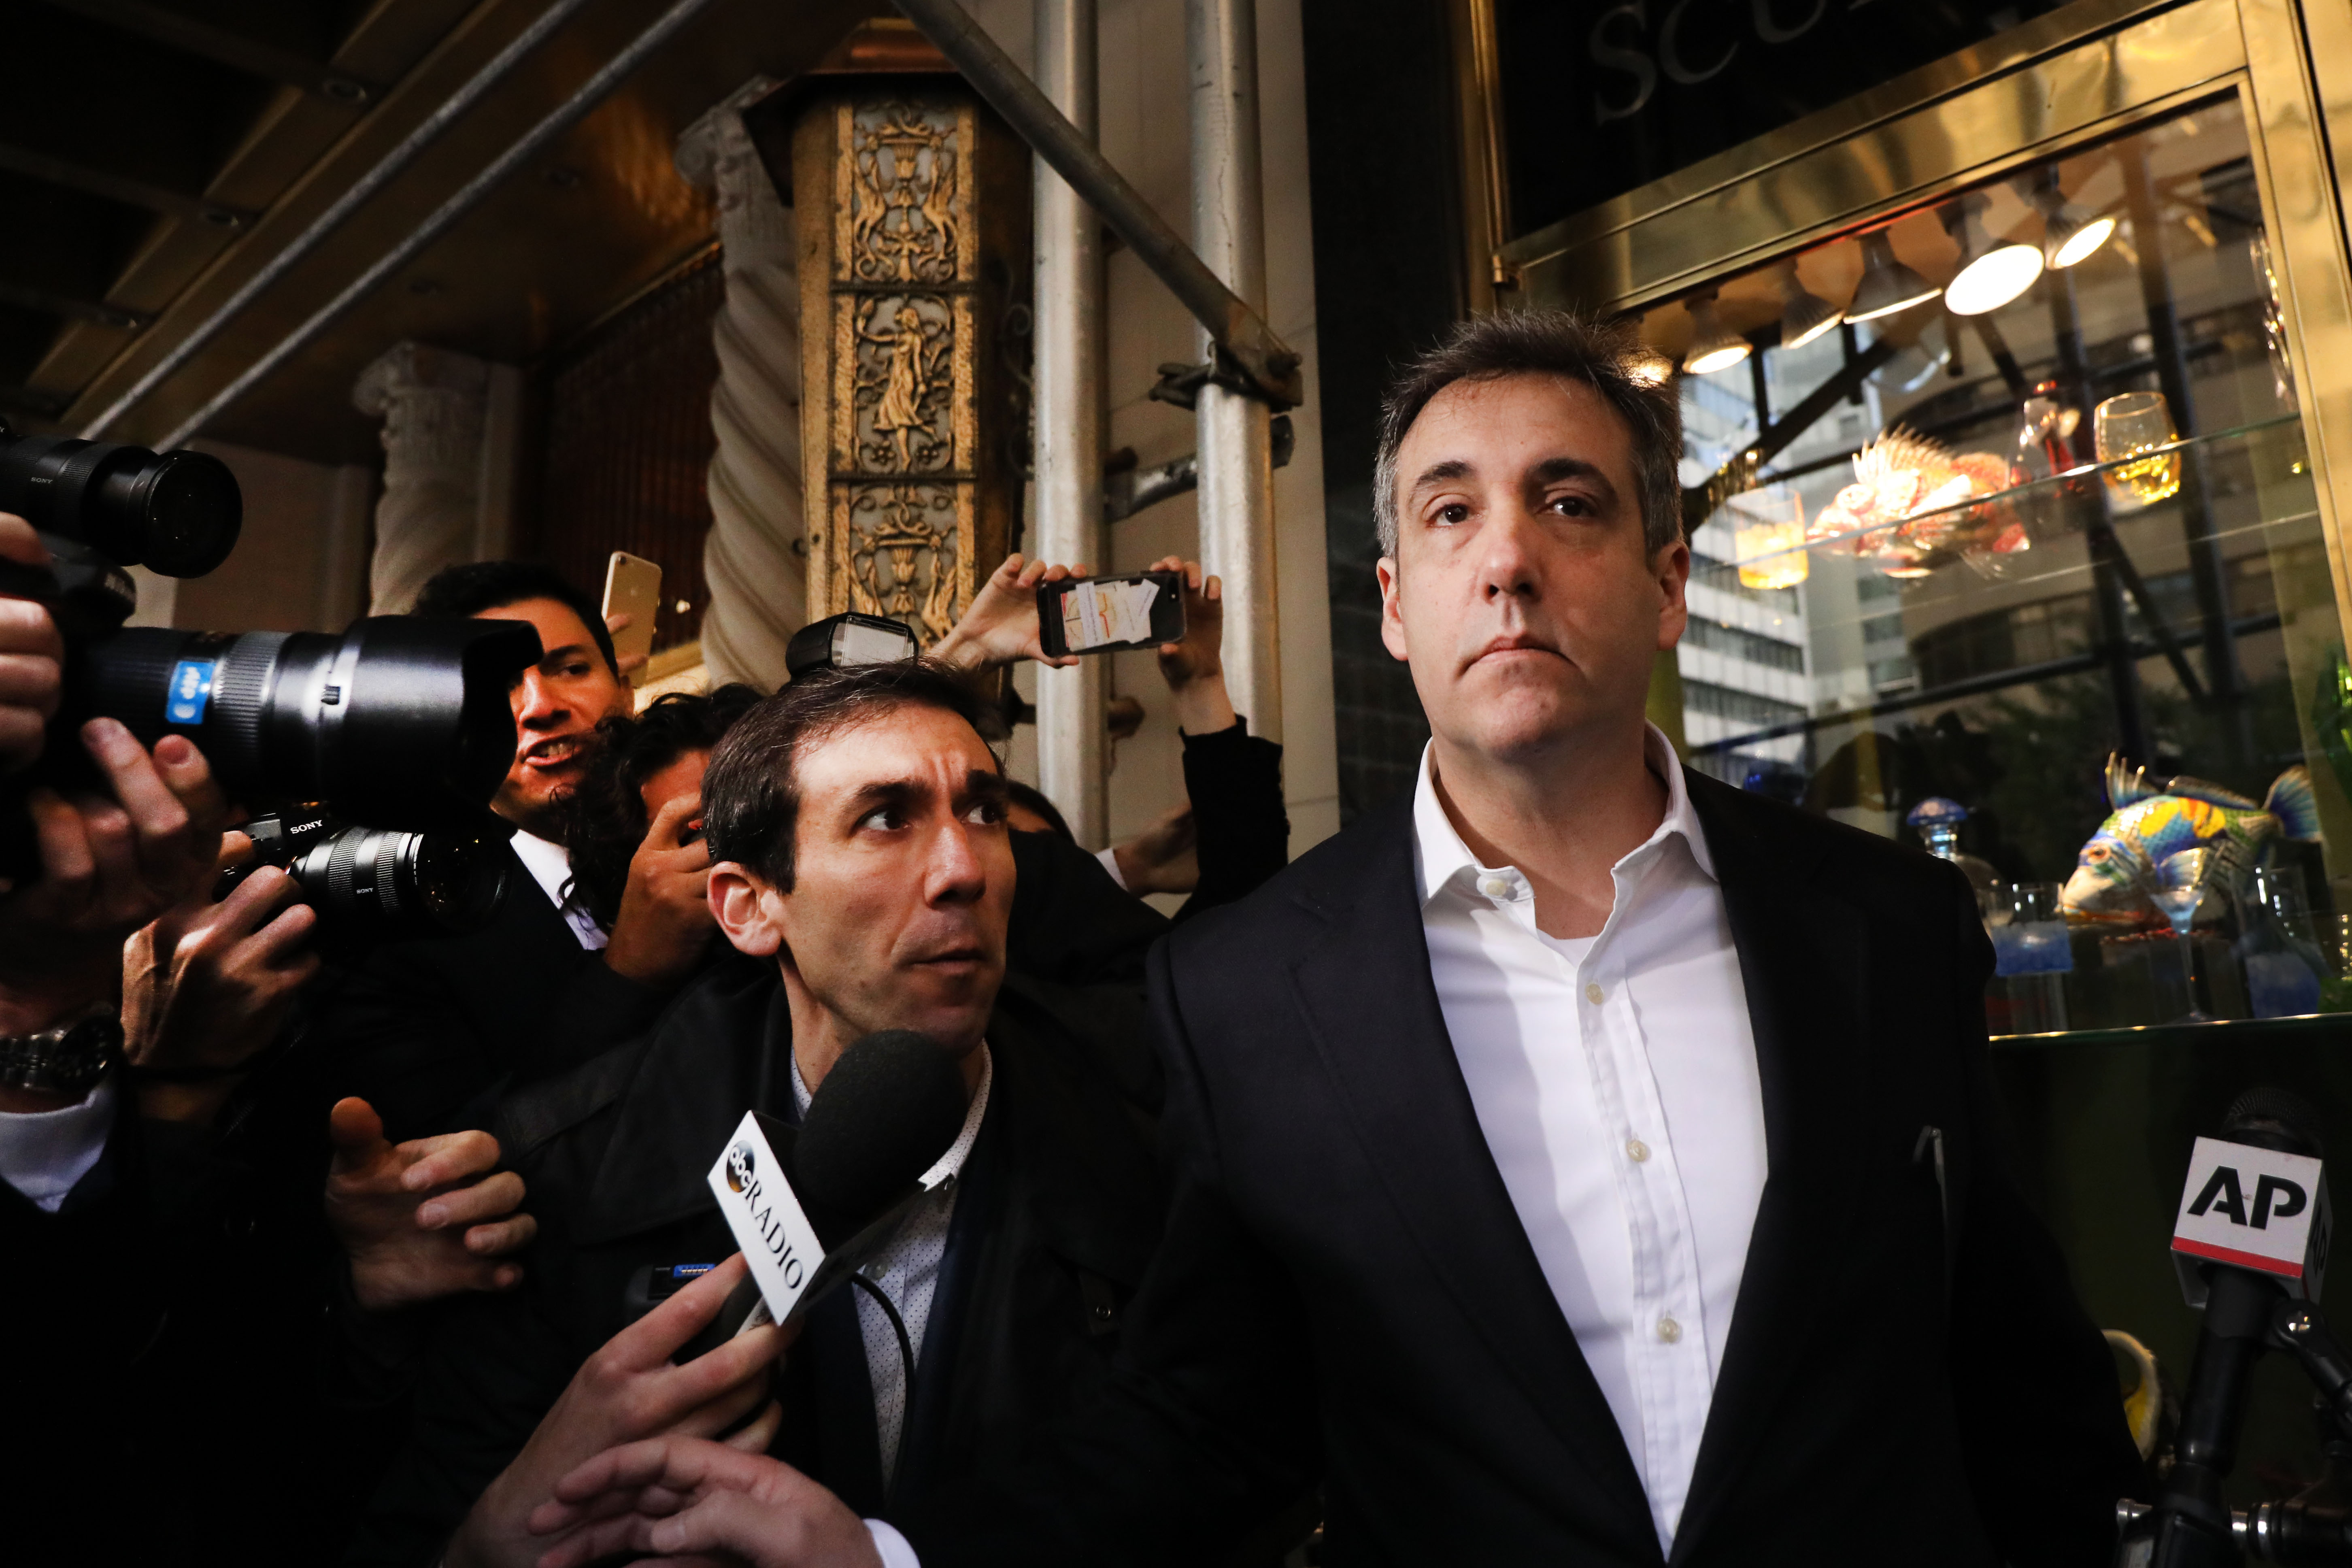 Michael Cohen, the former personal attorney to President Donald Trump, departs his Manhattan apartment for prison on May 06, 2019 in New York City. (Spencer Platt/Getty Images)